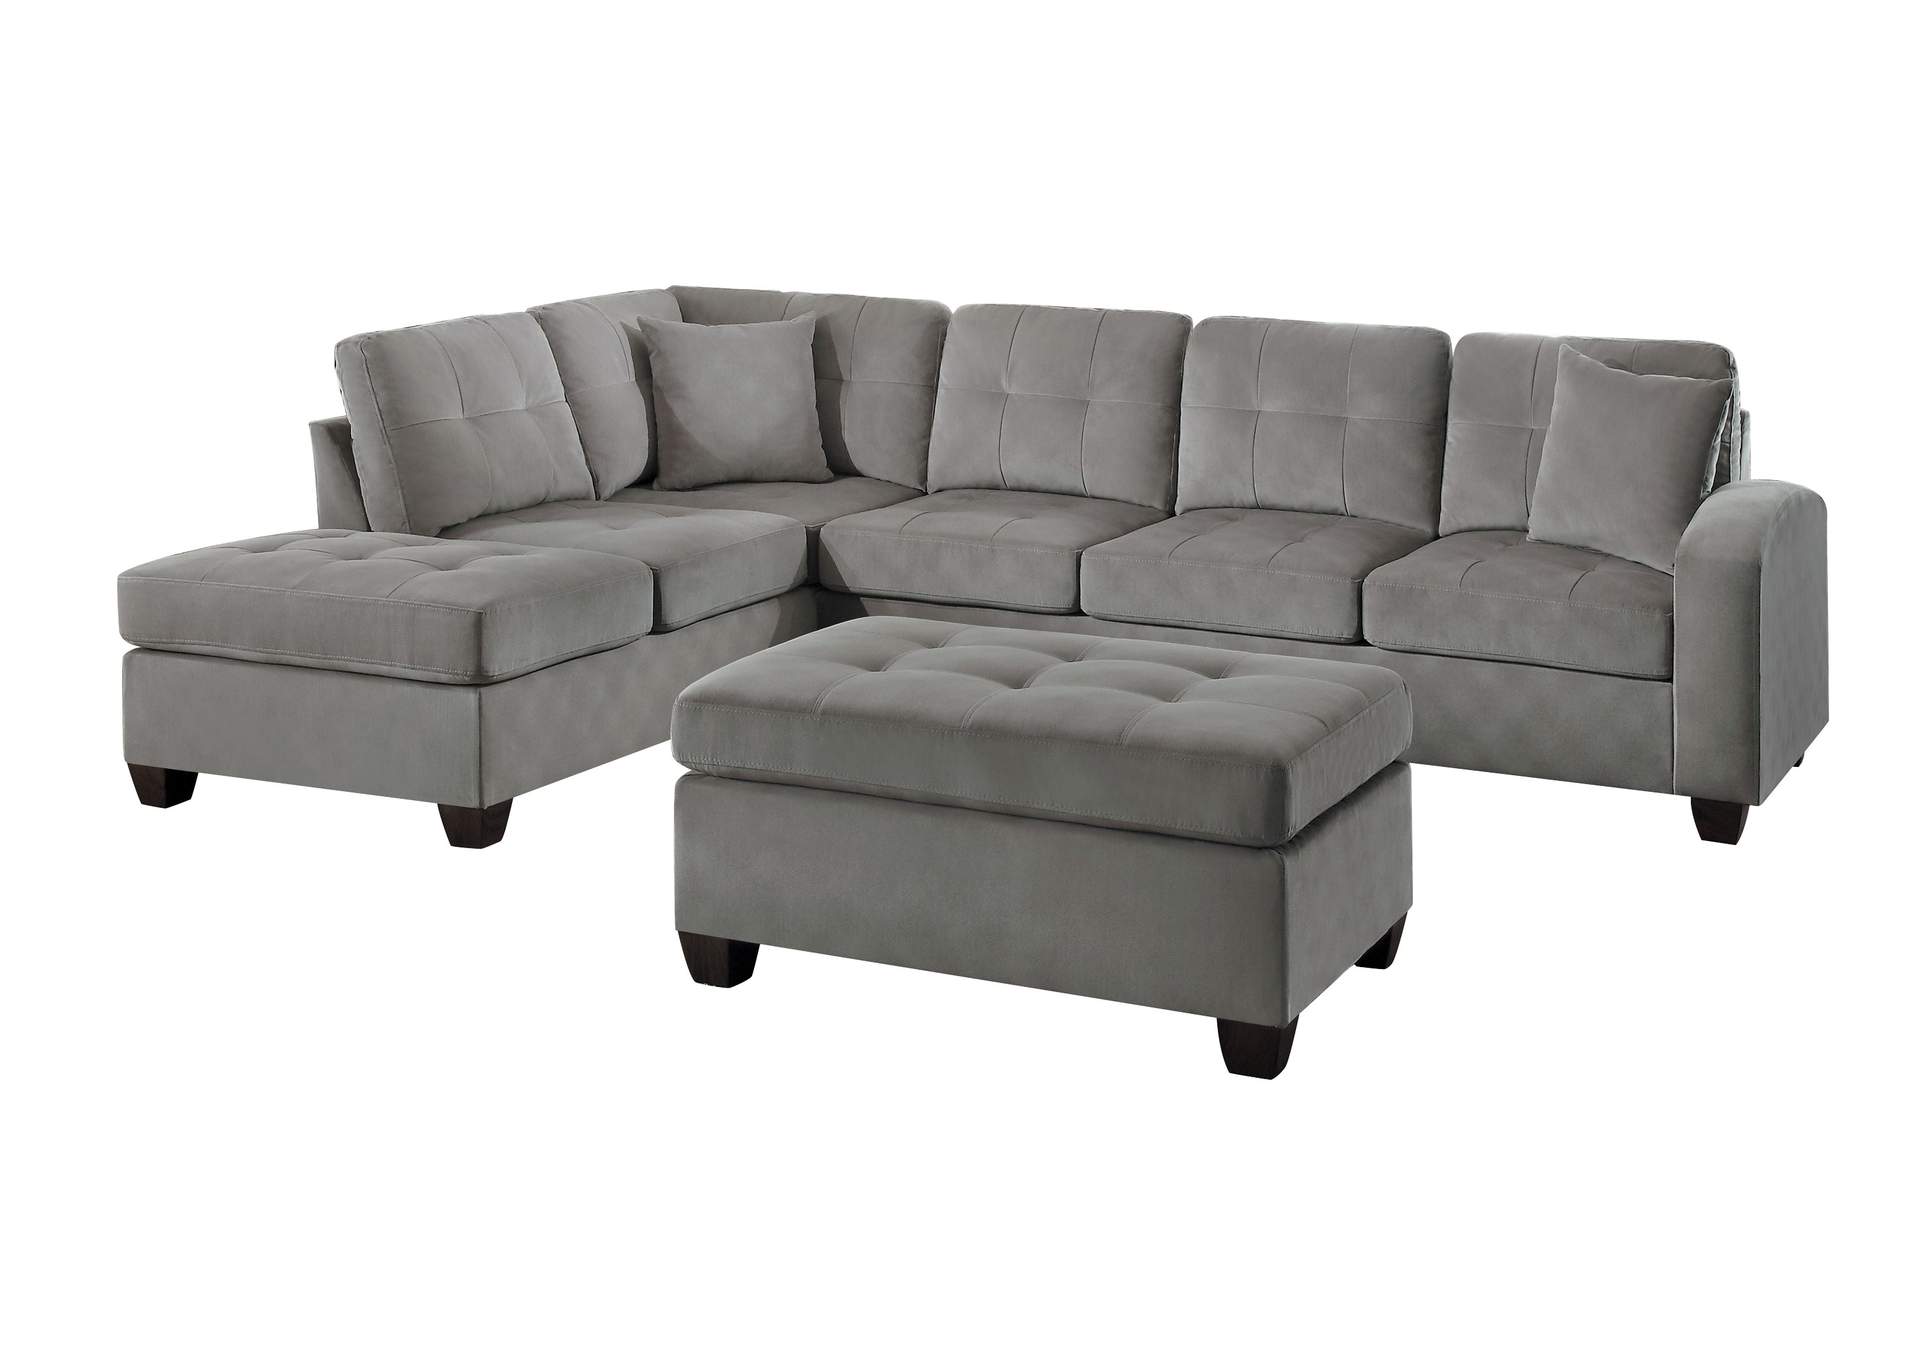 Taupe 3-Piece Reversible Sectional with Ottoman,Homelegance